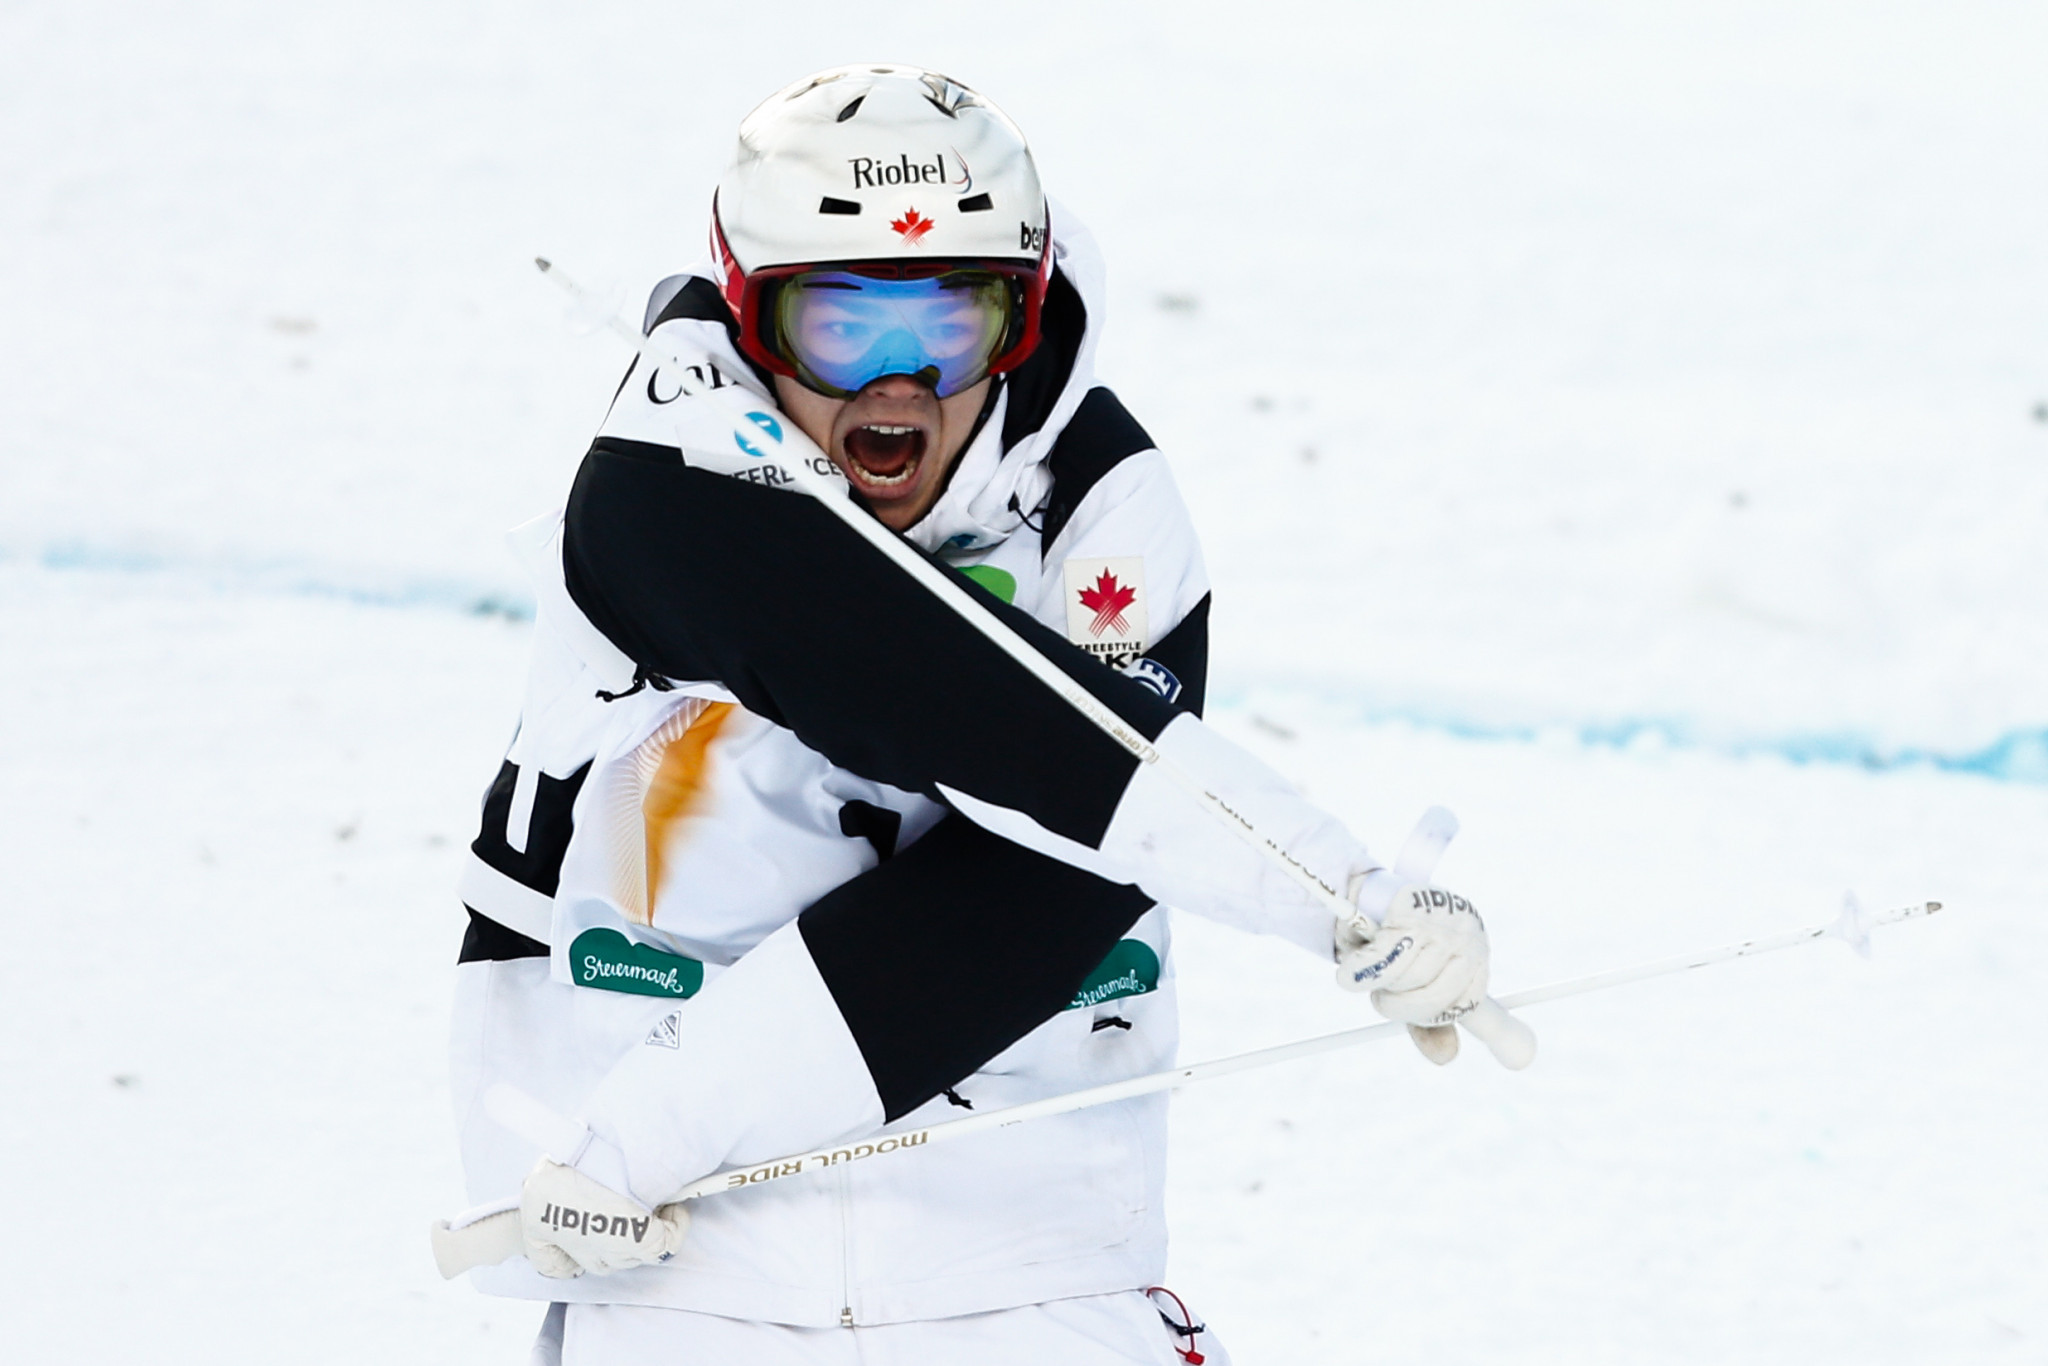 Mikael Kingsbury holds the record for the most moguls World Cup wins with 48 to his name ©Getty Images